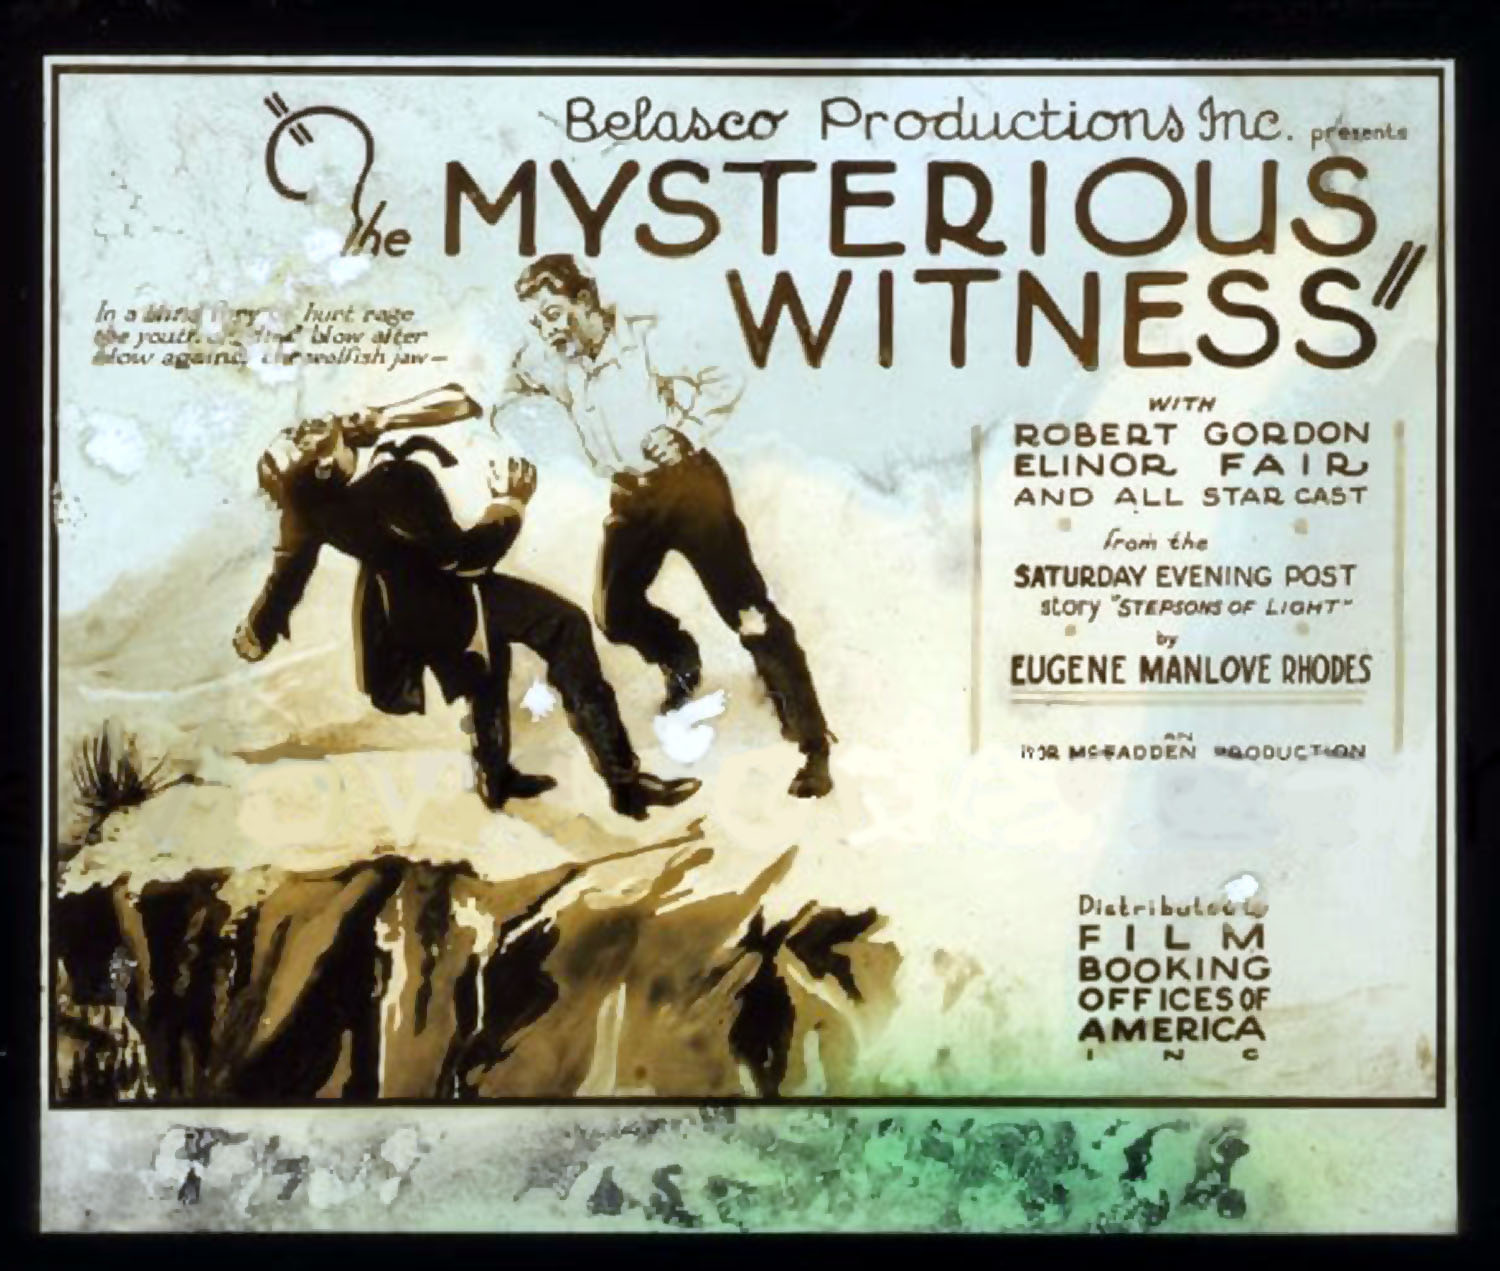 MYSTERIOUS WITNESS, THE